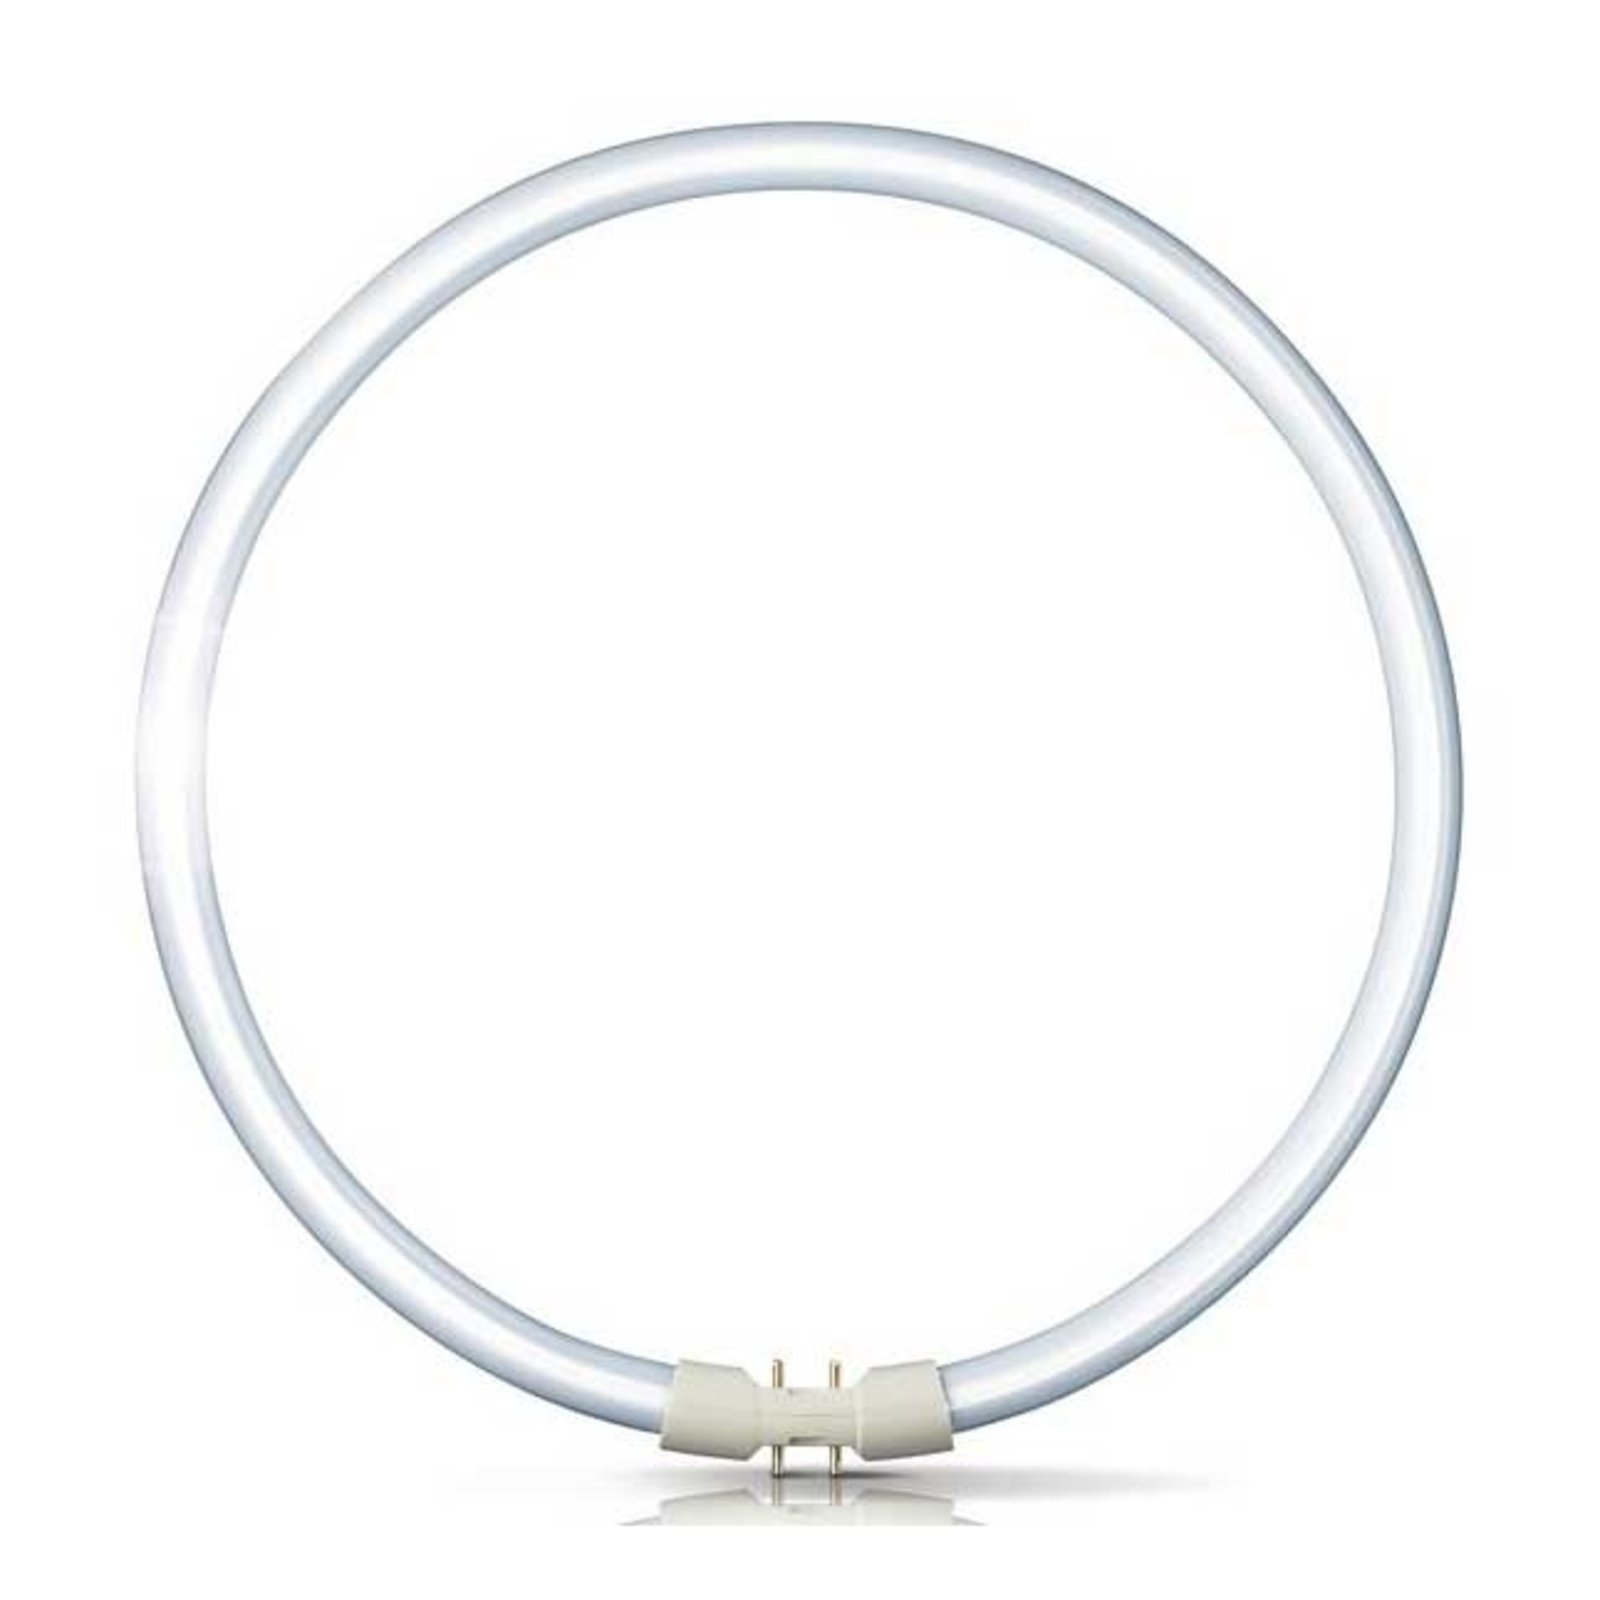 2GX13 60W 830 Ring-Leuchtstofflampe Master TL5